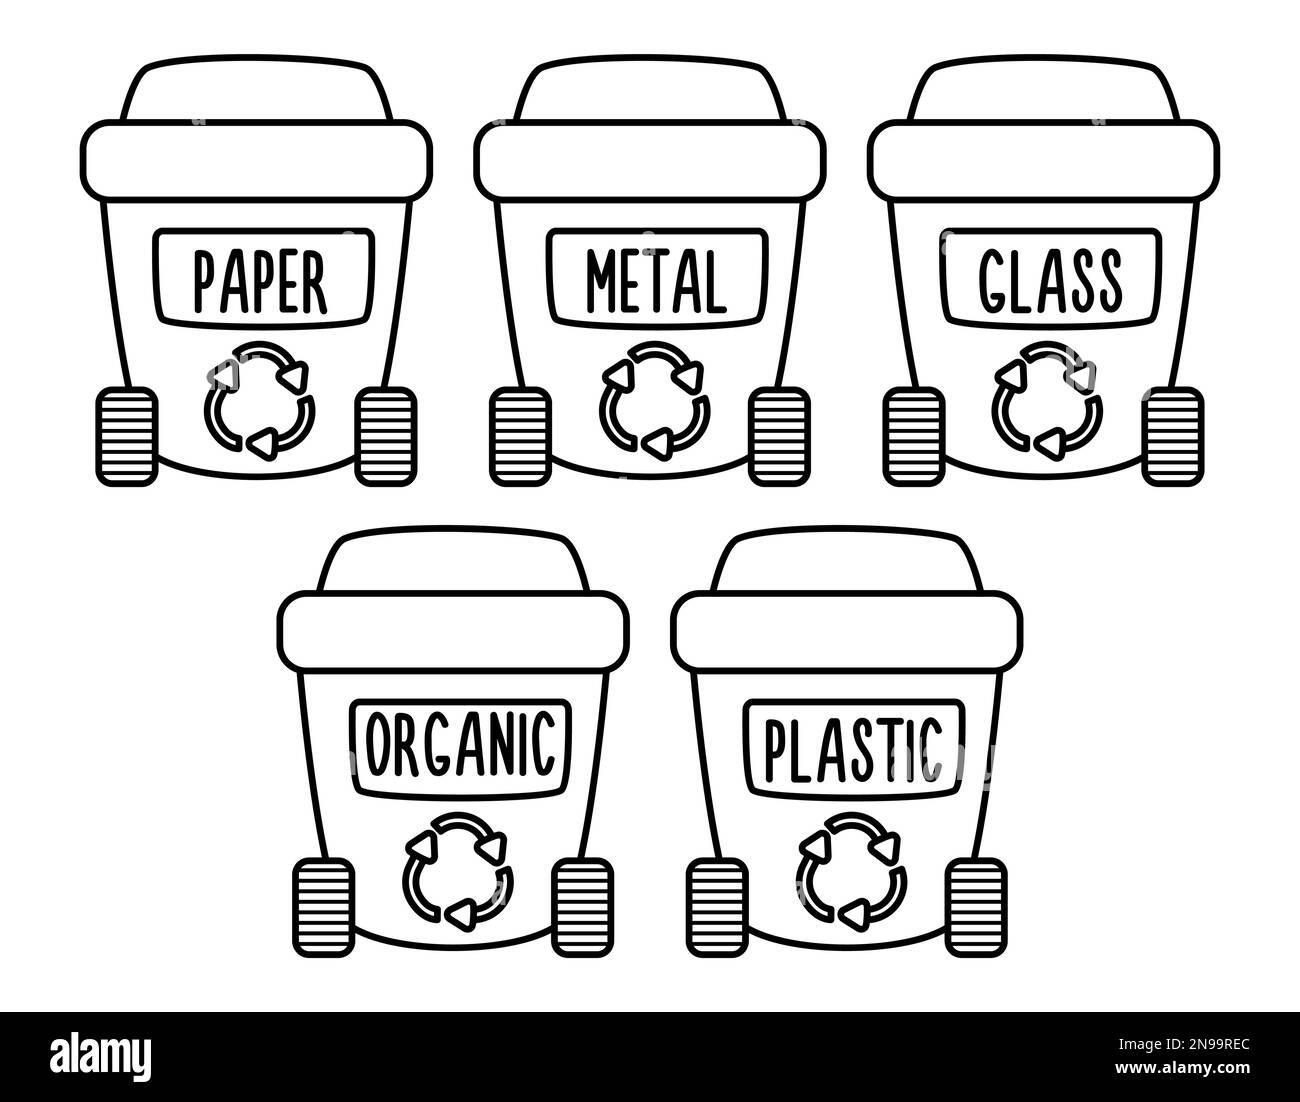 Vector black and white waste sorting bins icon. Line organic, paper, metal, glass, plastic garbage boxes. Earth day or zero waste ecological concept. Stock Vector